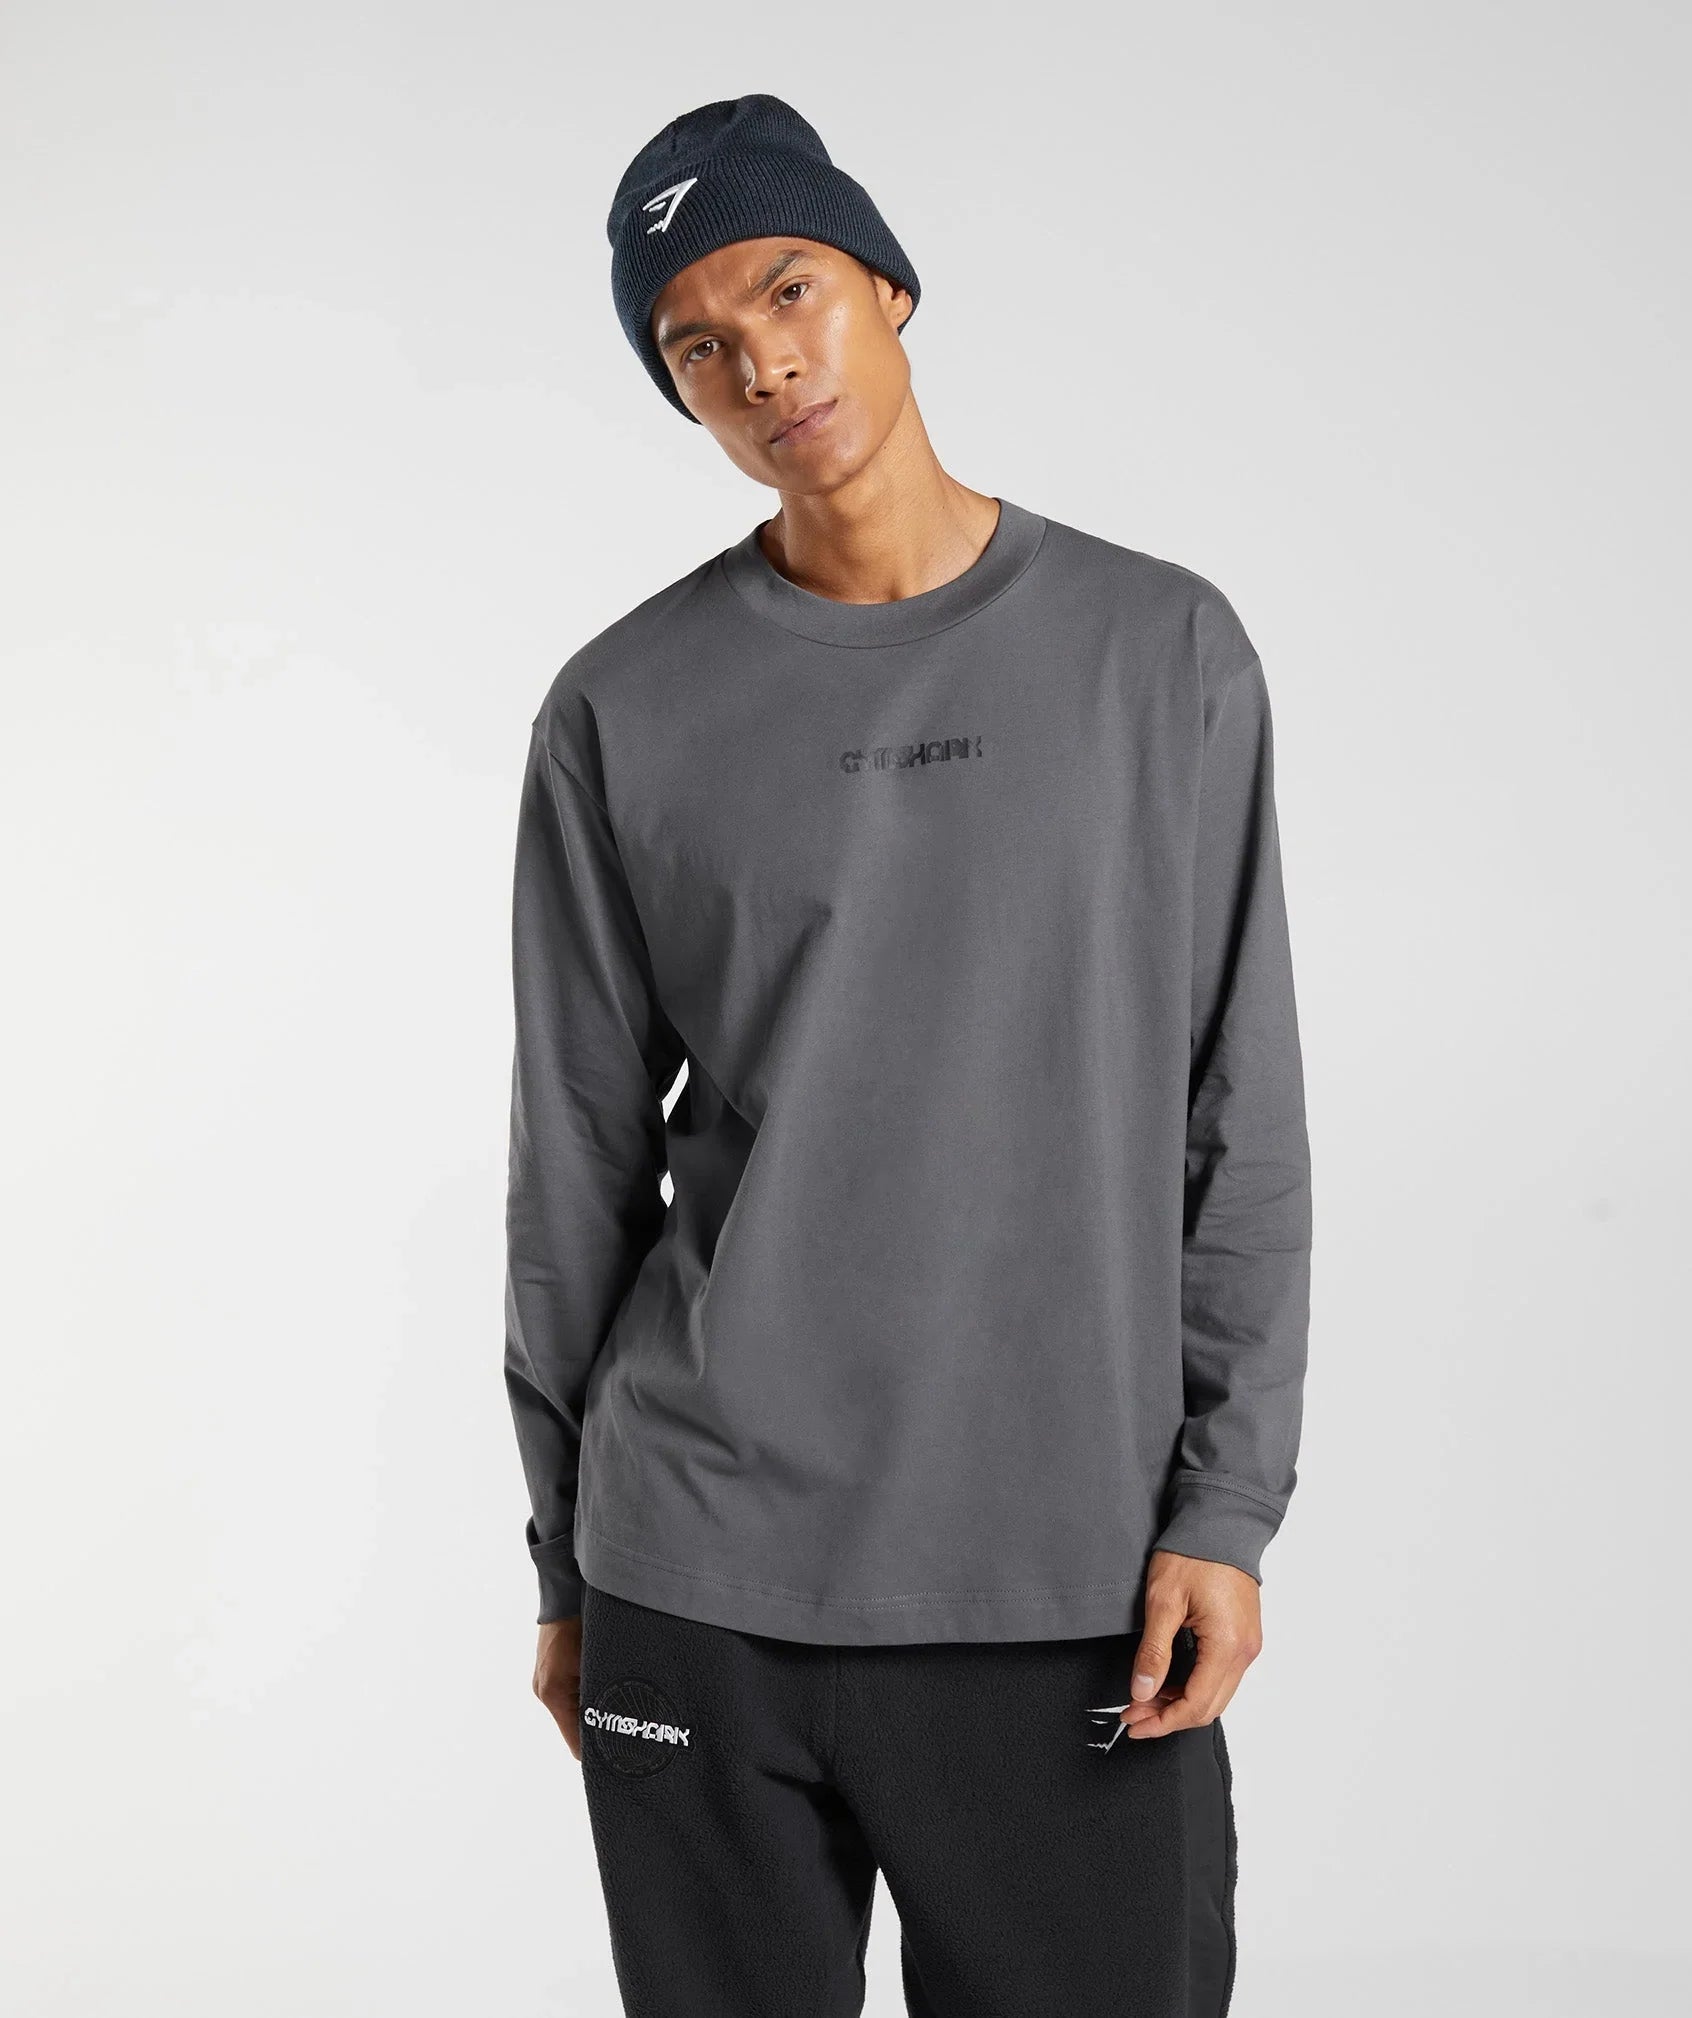 Vibes Long Sleeve T-Shirt in Silhouette Grey - view 2